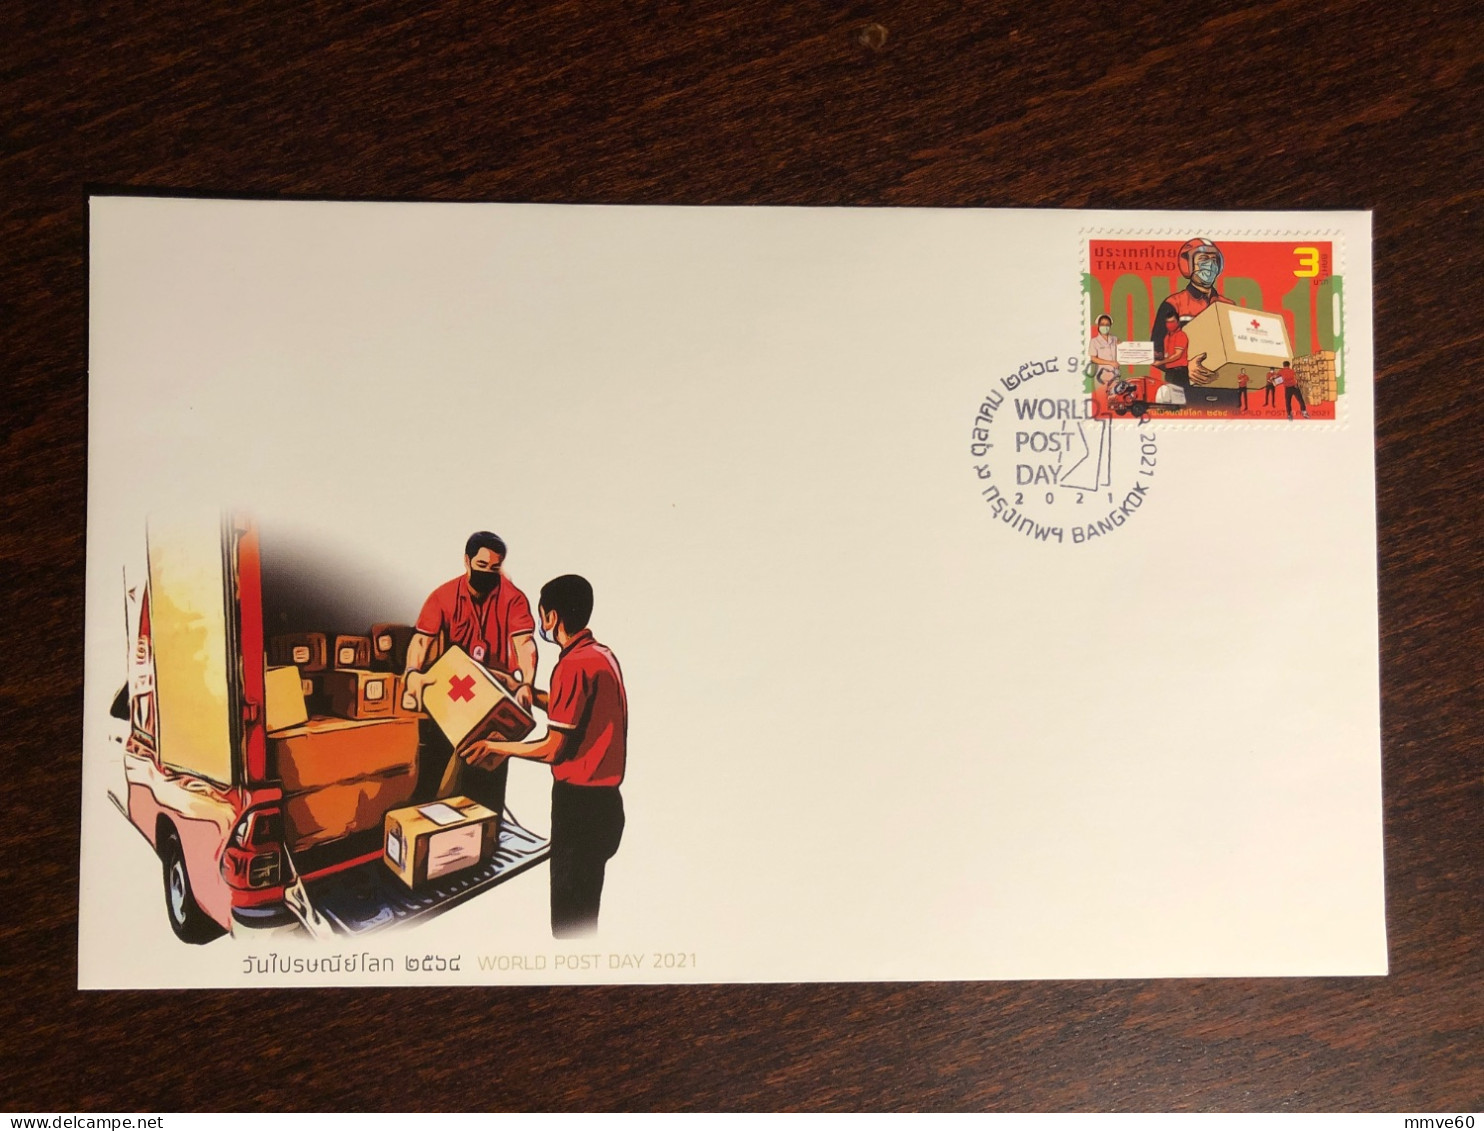 THAILAND FDC COVER 2021 YEAR COVID RED CROSS HEALTH MEDICINE STAMPS - Tailandia